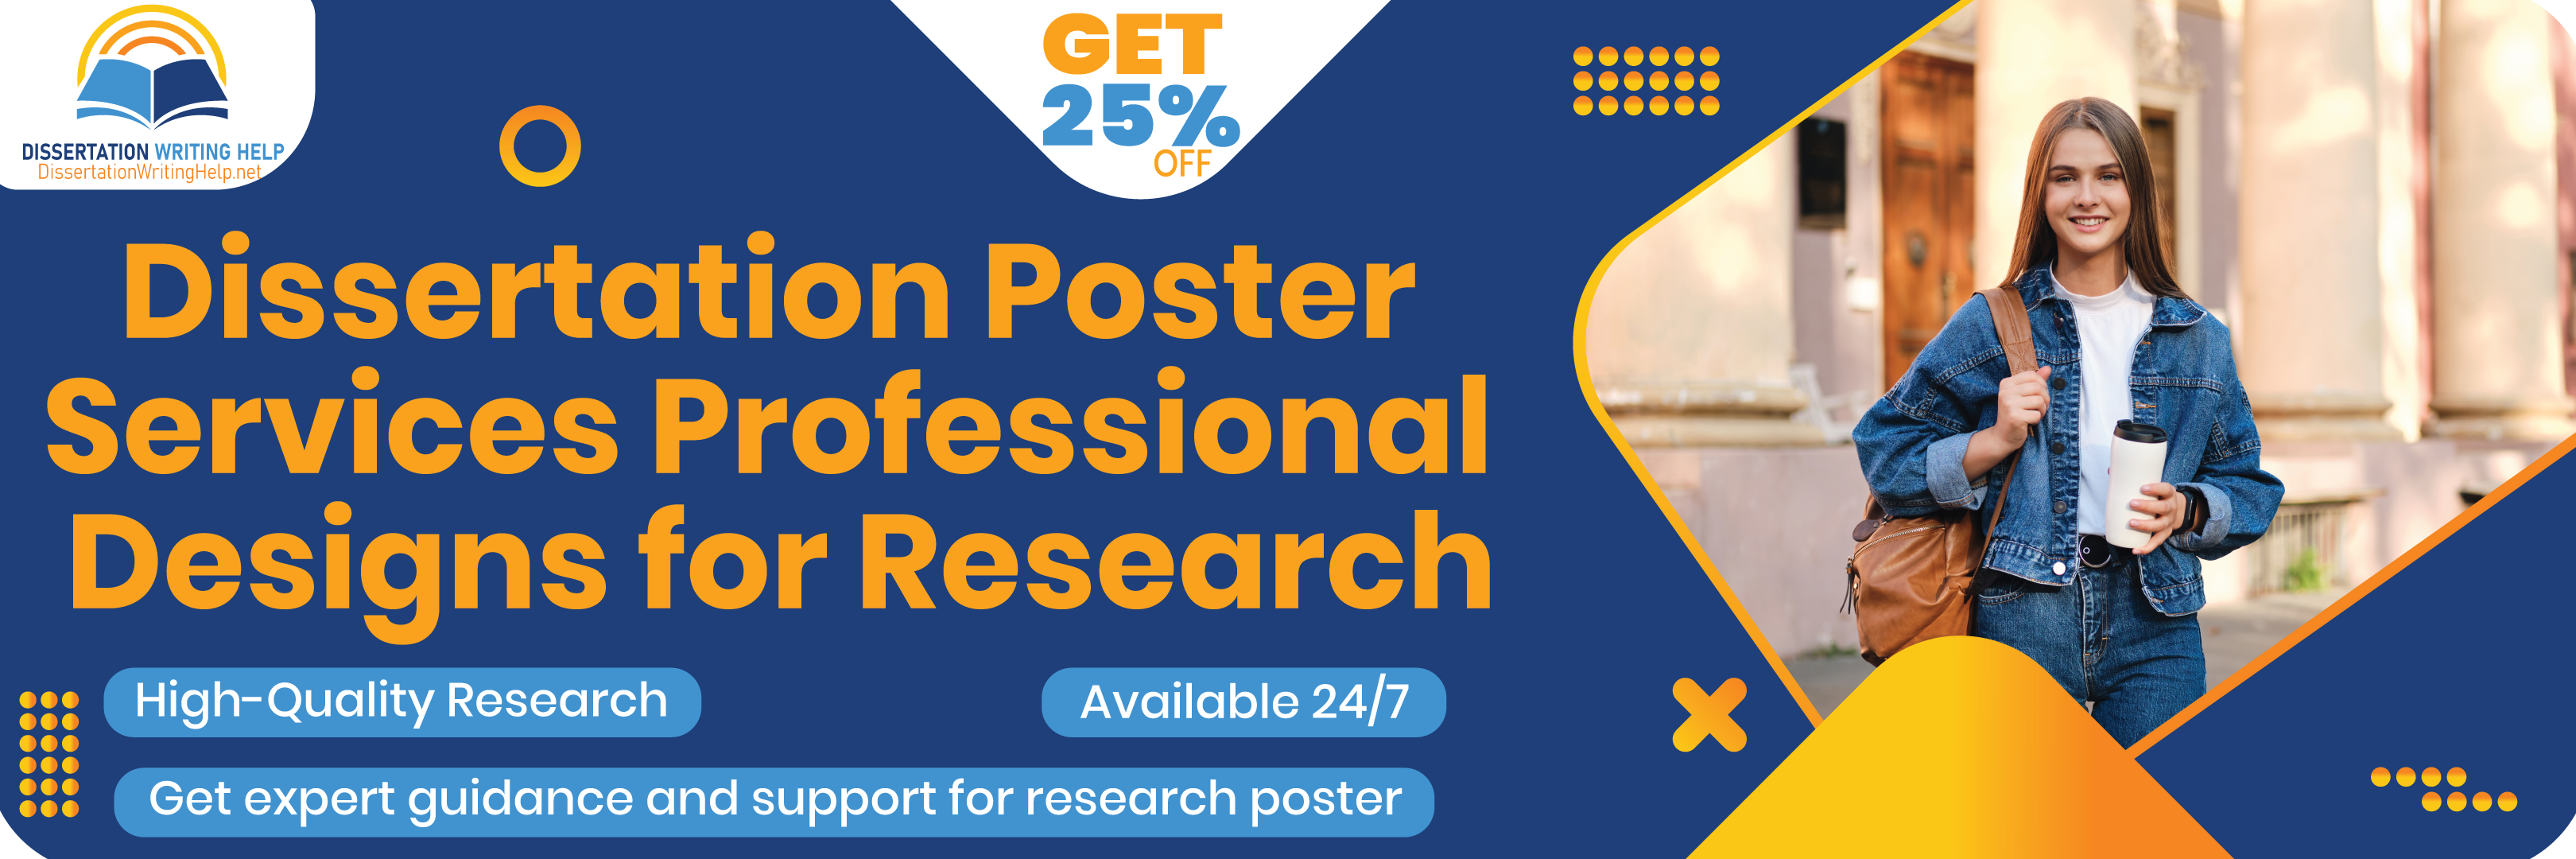 Dissertation-Poster-Services-Professional-Designs-for-Research